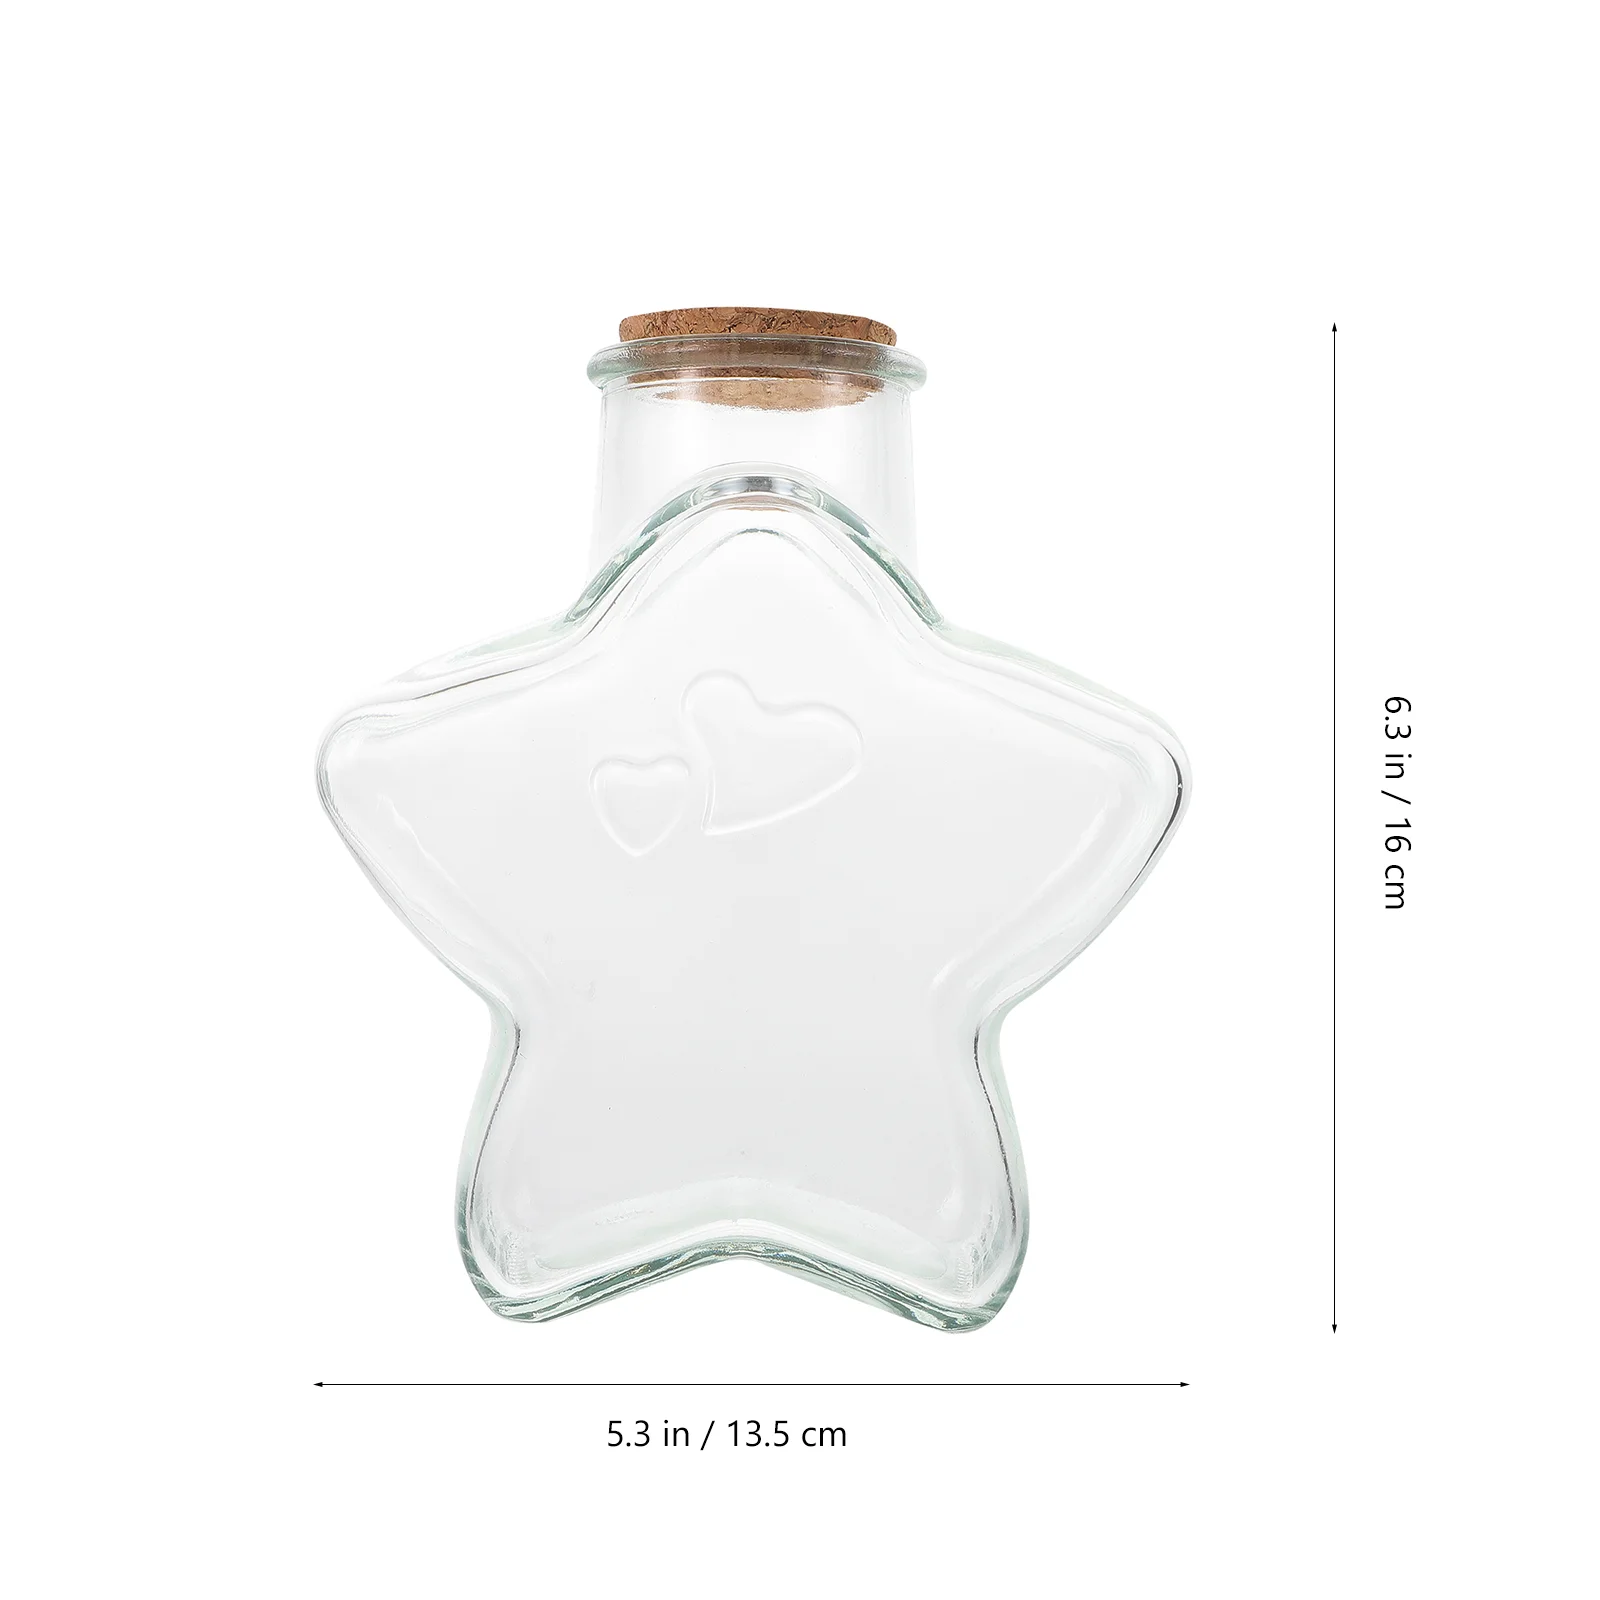 HLZC 350 Pieces Origami Stars Plastic Straw Kit with 2 Pieces Star-Shaped  Transparent Plastic Jars Wishing Bottle